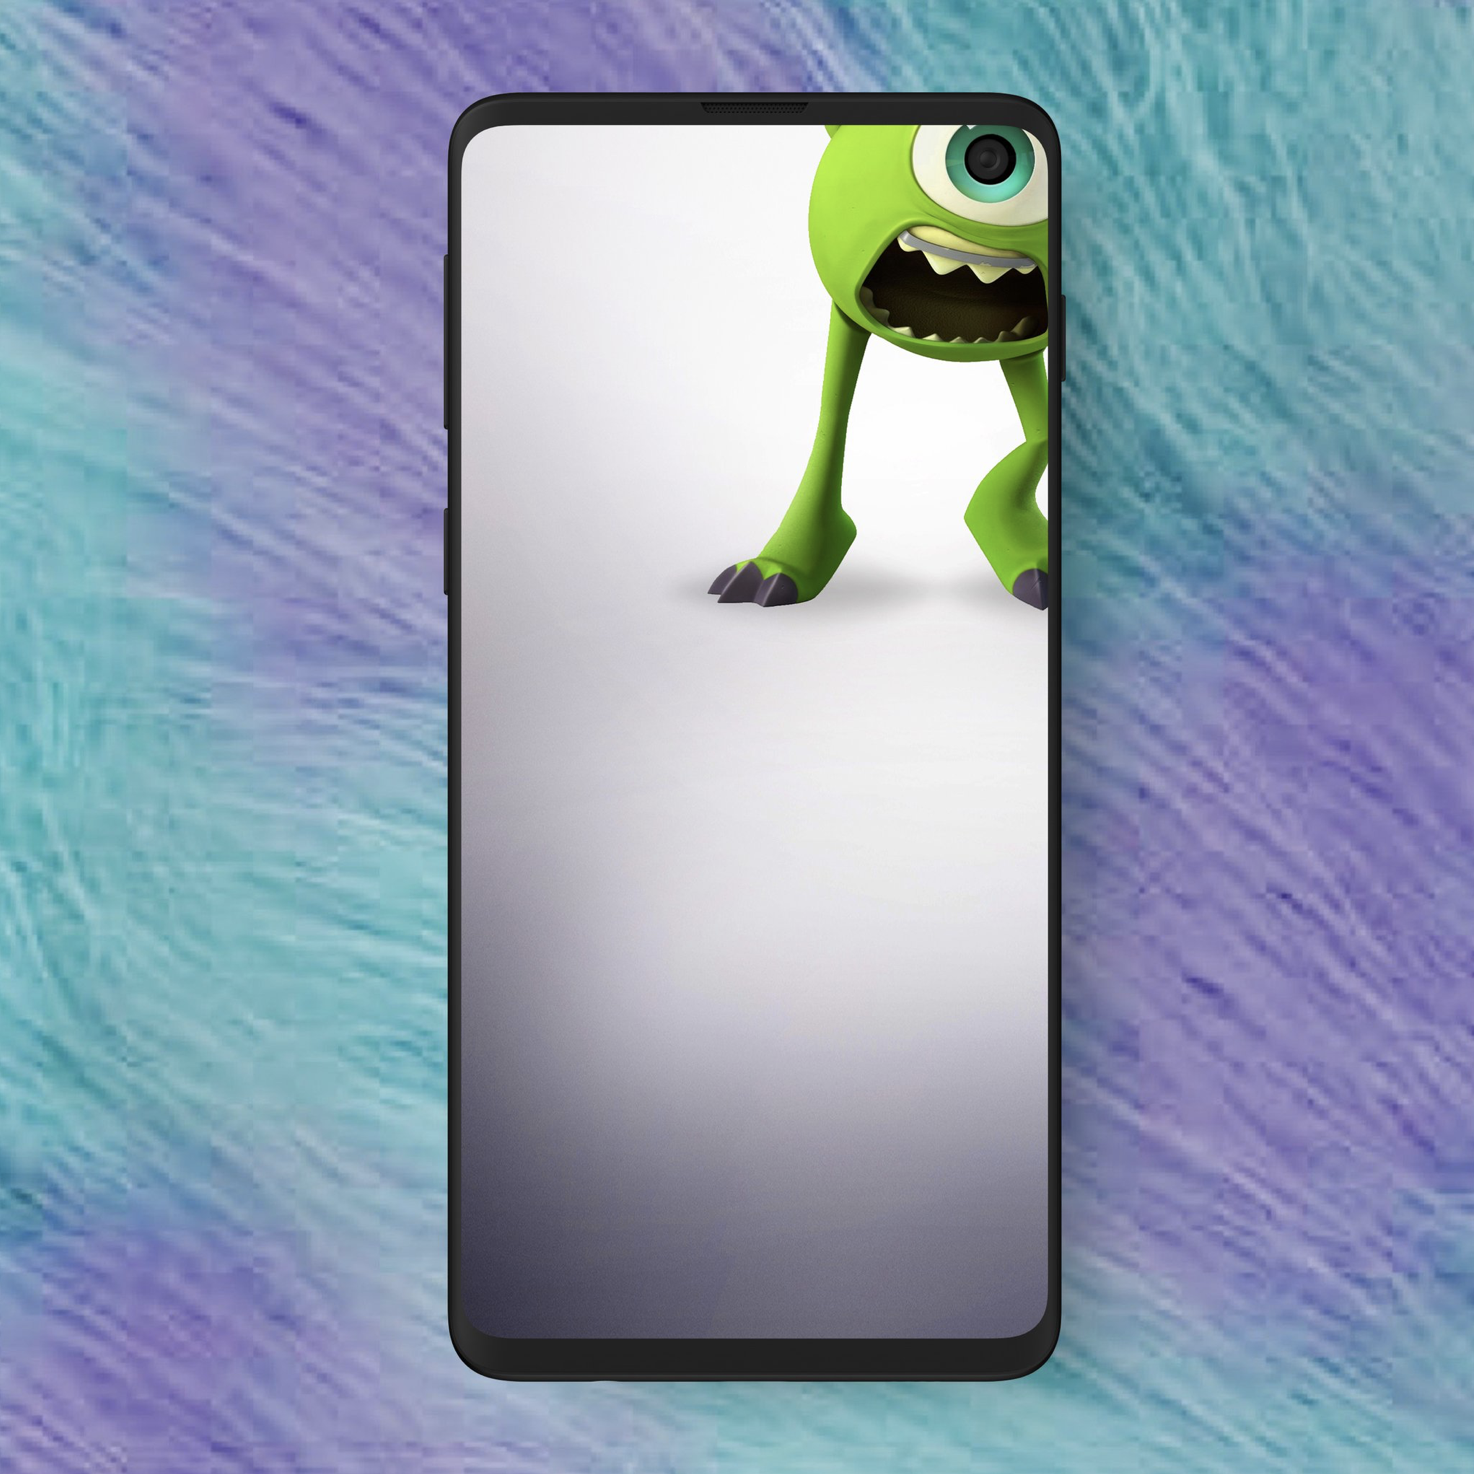 Download Samsung Galaxy S10 Wallpapers [QHD+] (31 Official Walls)